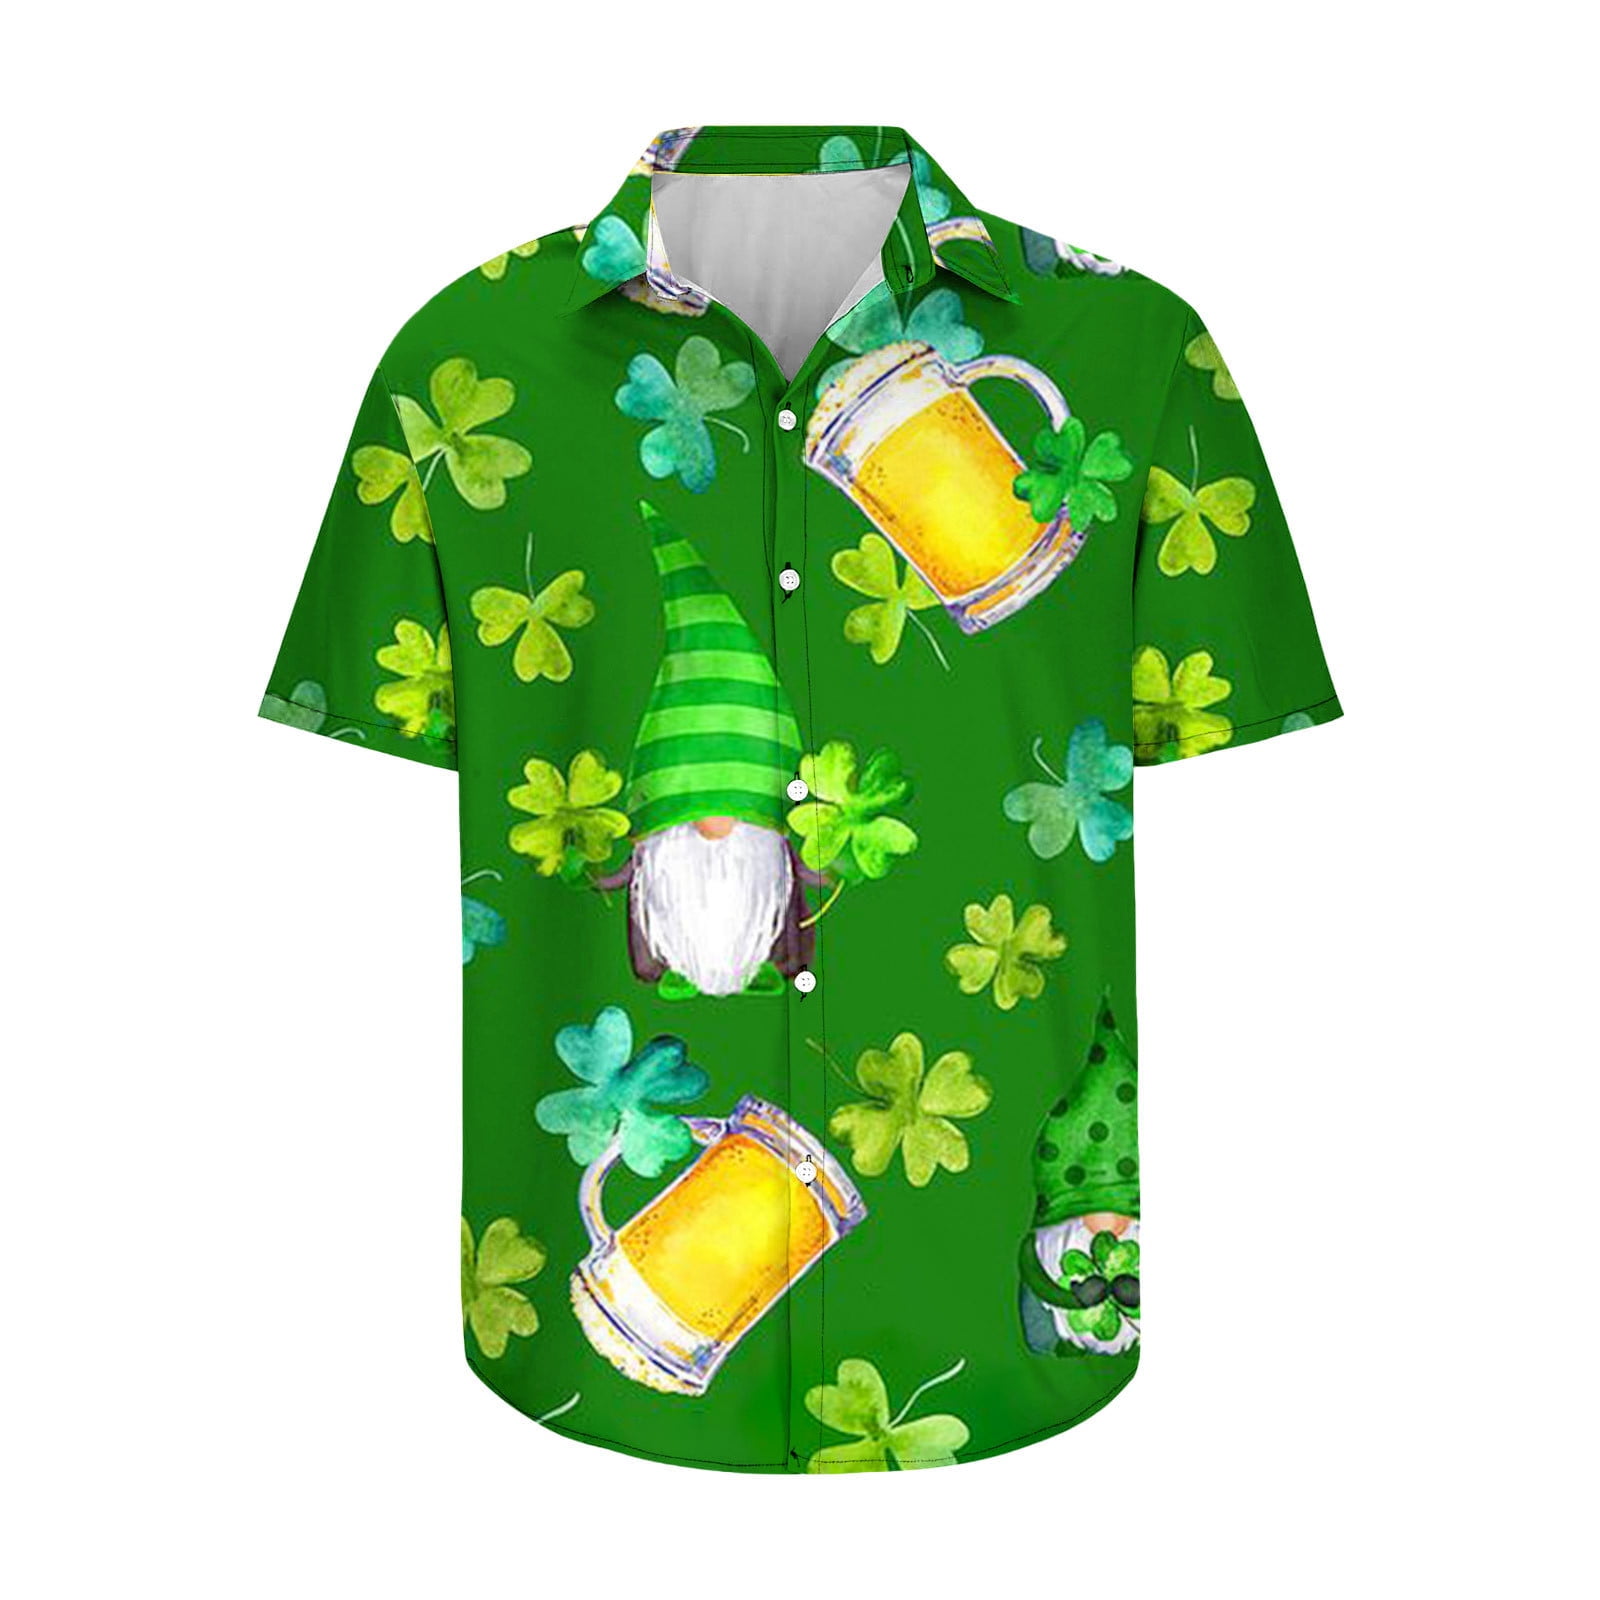 ZCFZJW Men St. Patrick's Day T-Shirts Casual Short Sleeve Button Down V  Neck Shirts Cute Gnome Graphic Big and Tall Regular Fitted Holiday Tee Tops